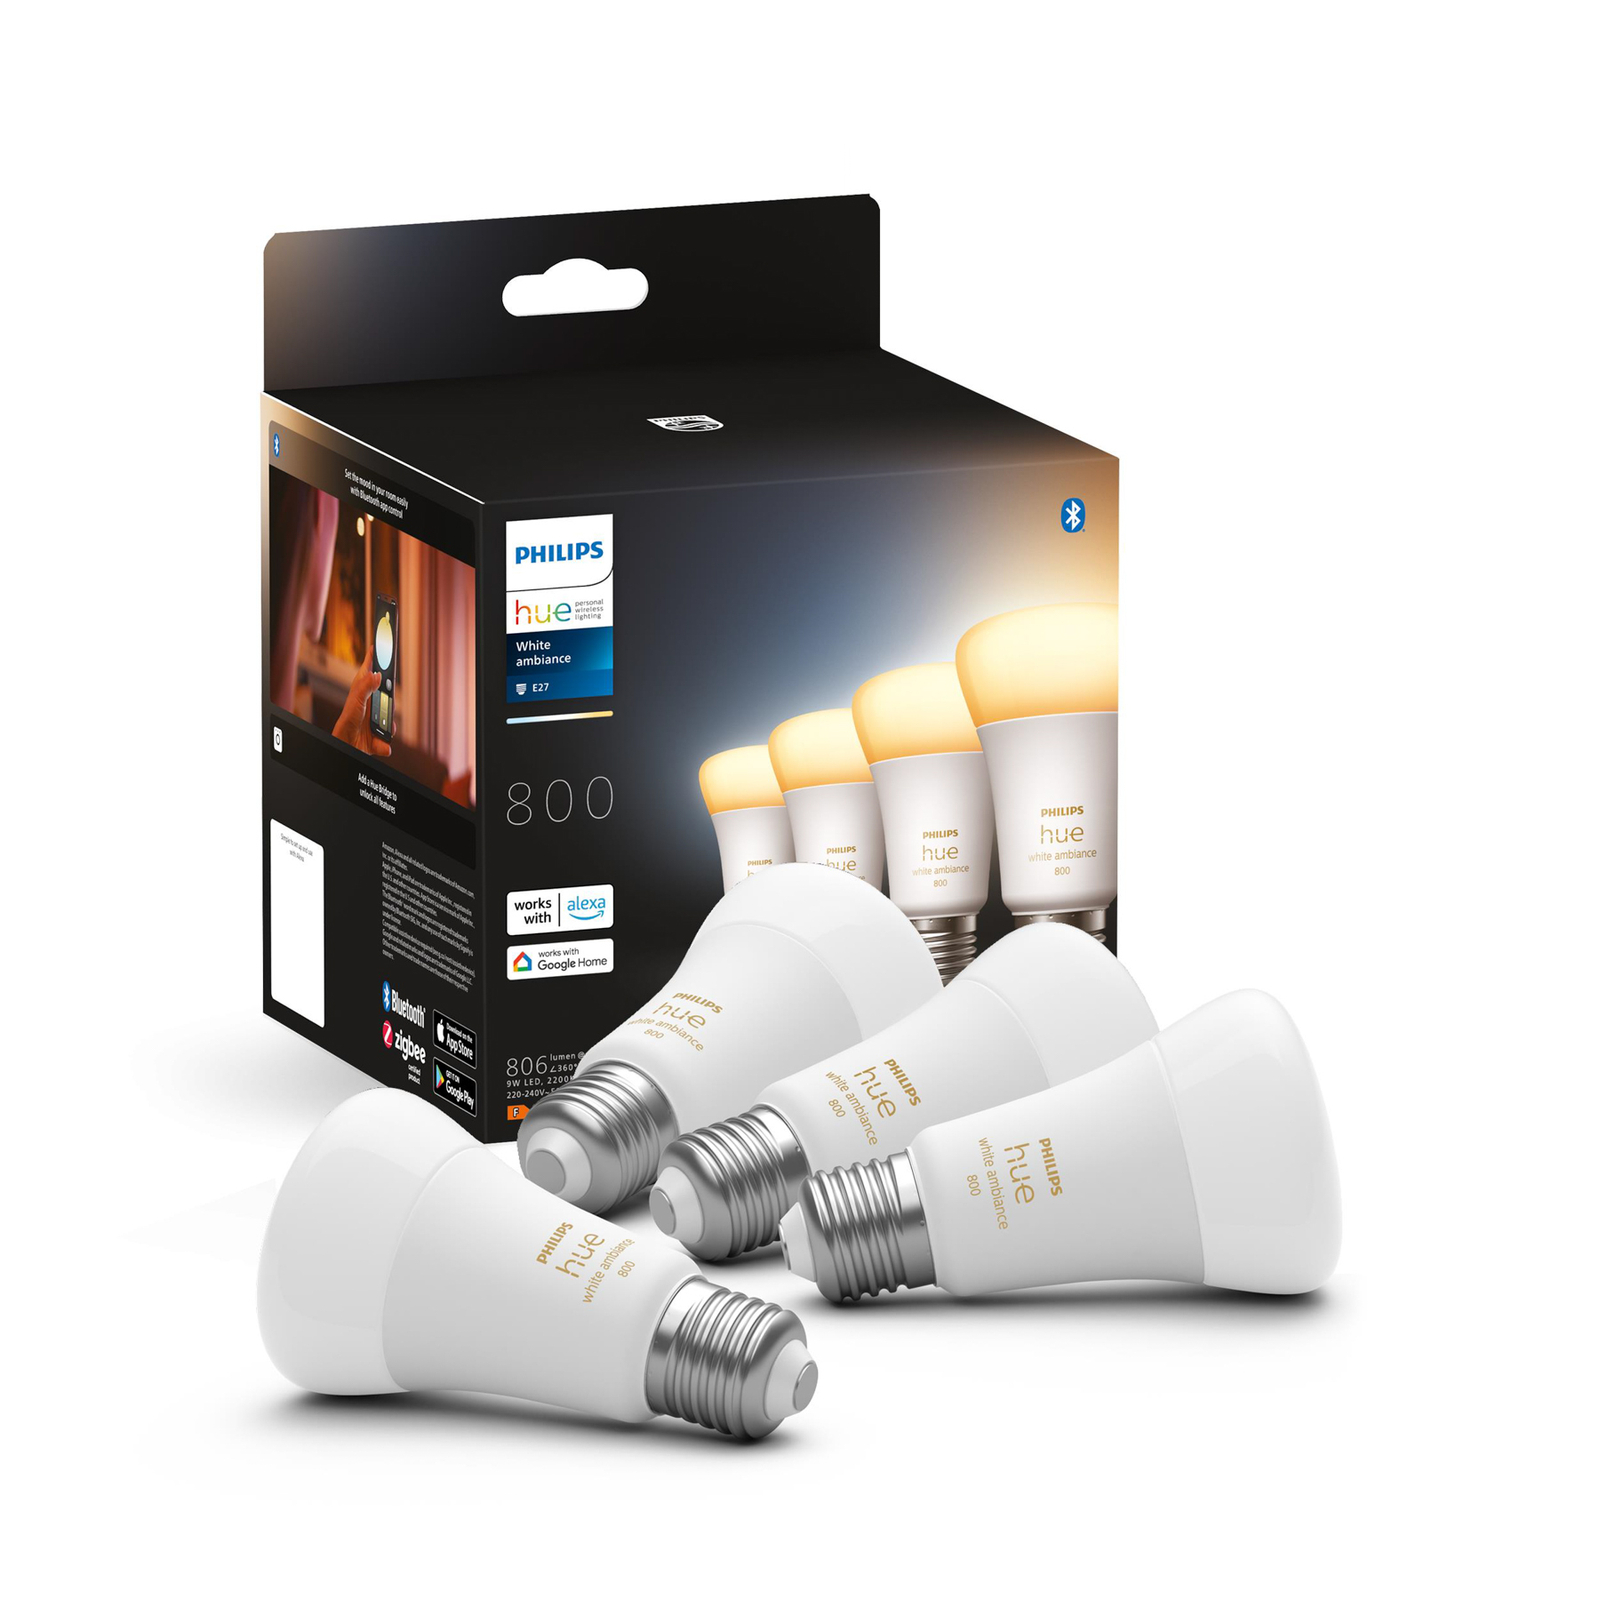 Philips Hue White Ambiance 6W 800lm E27, pack de 4